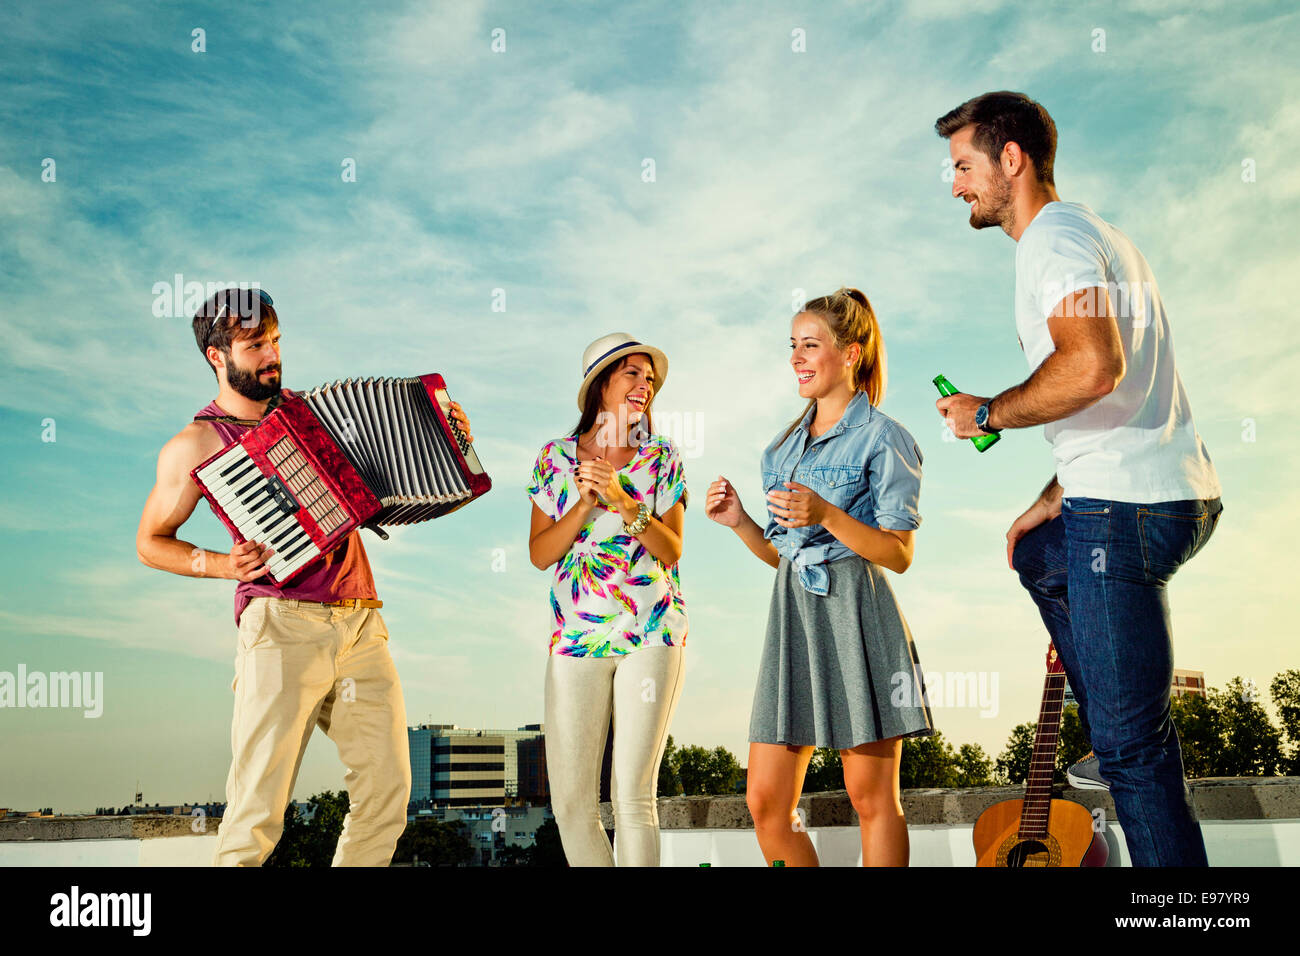 Man playing accordion while friends dancing at rooftop party Stock Photo